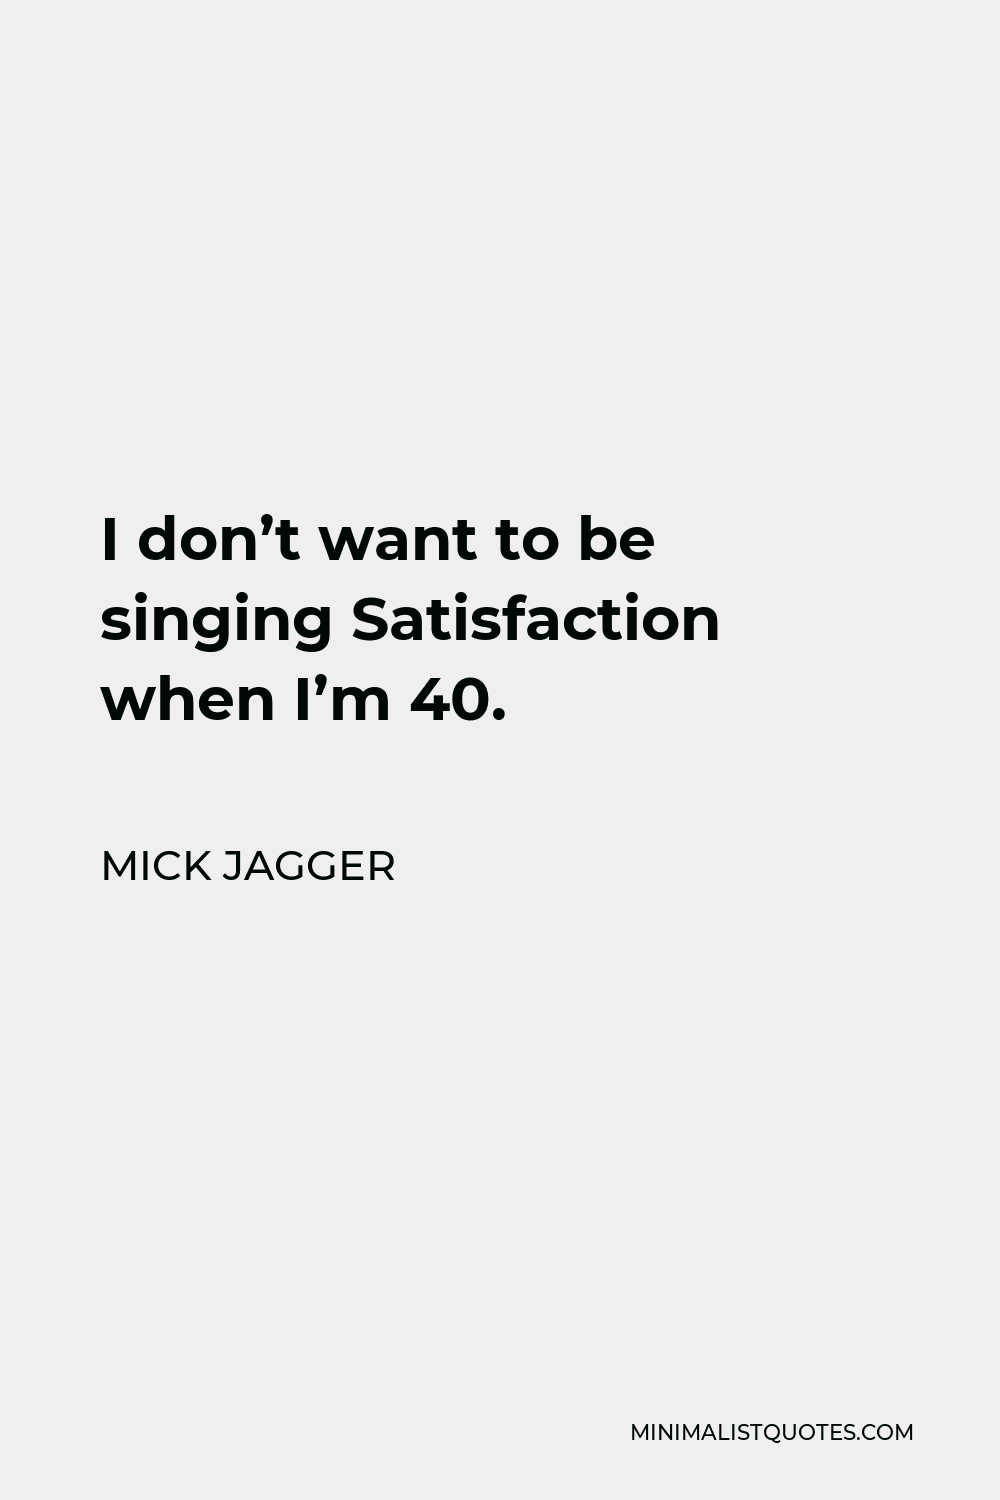 Mick Jagger Quote - I don’t want to be singing Satisfaction when I’m 40.